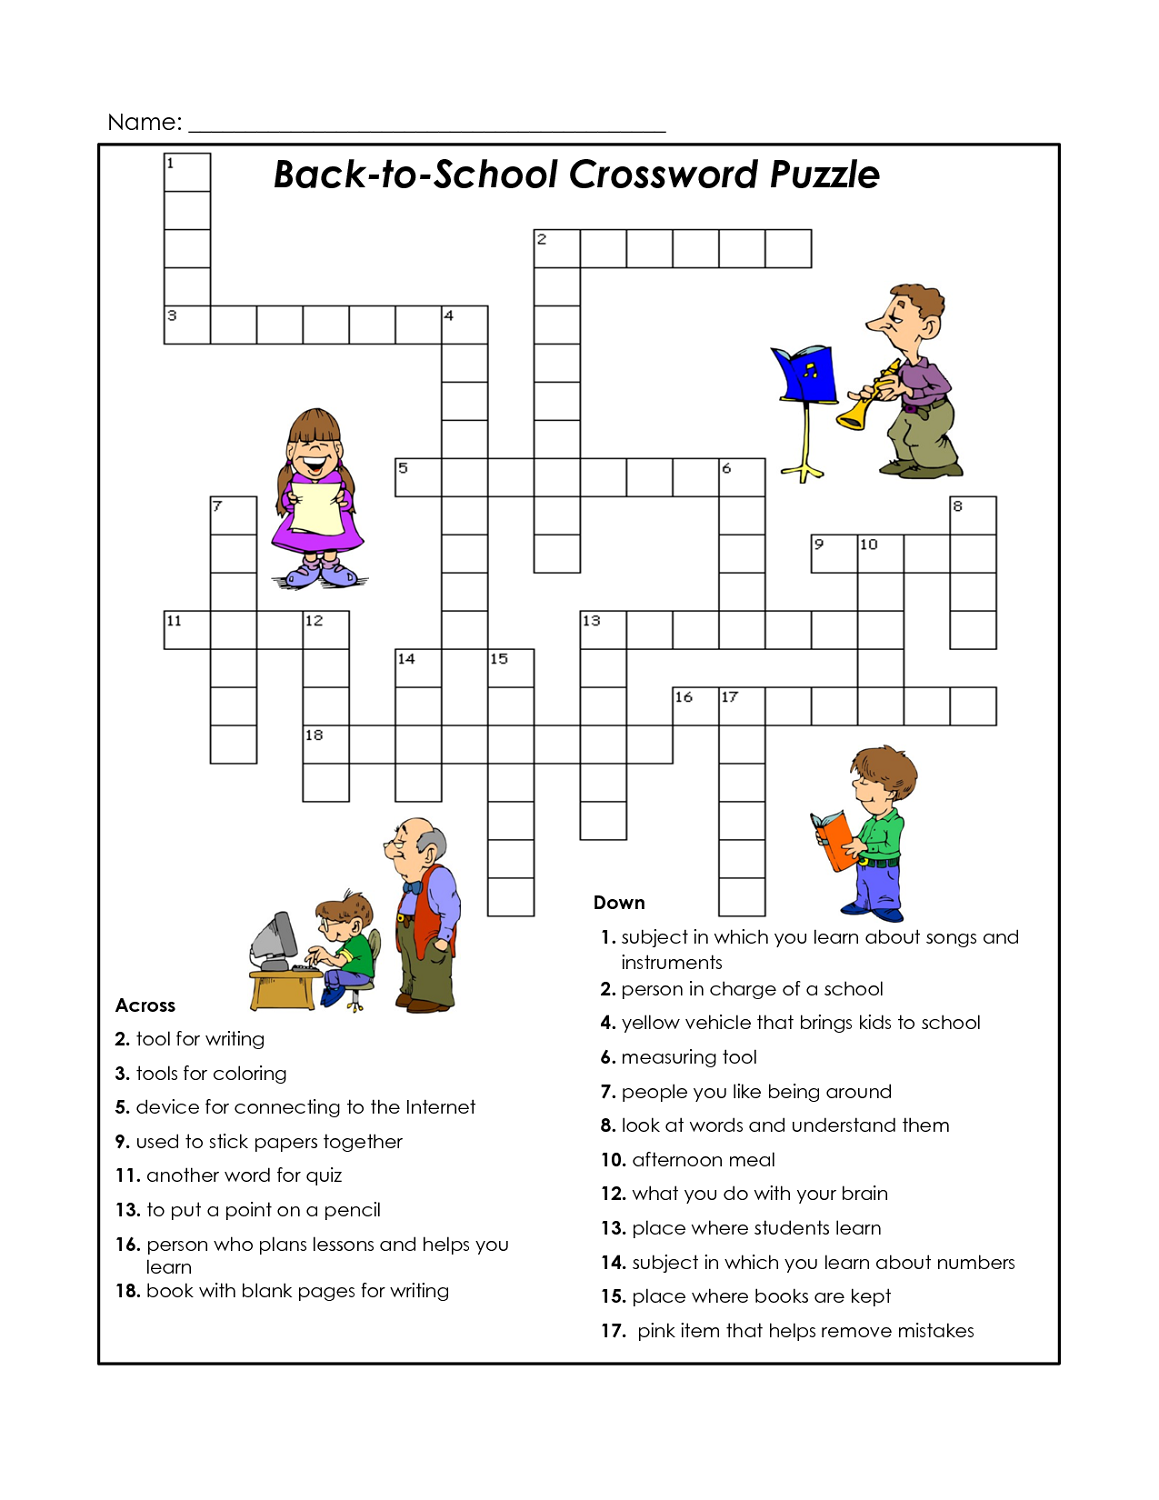 homophones crossword puzzle read the clues and use the word bank to